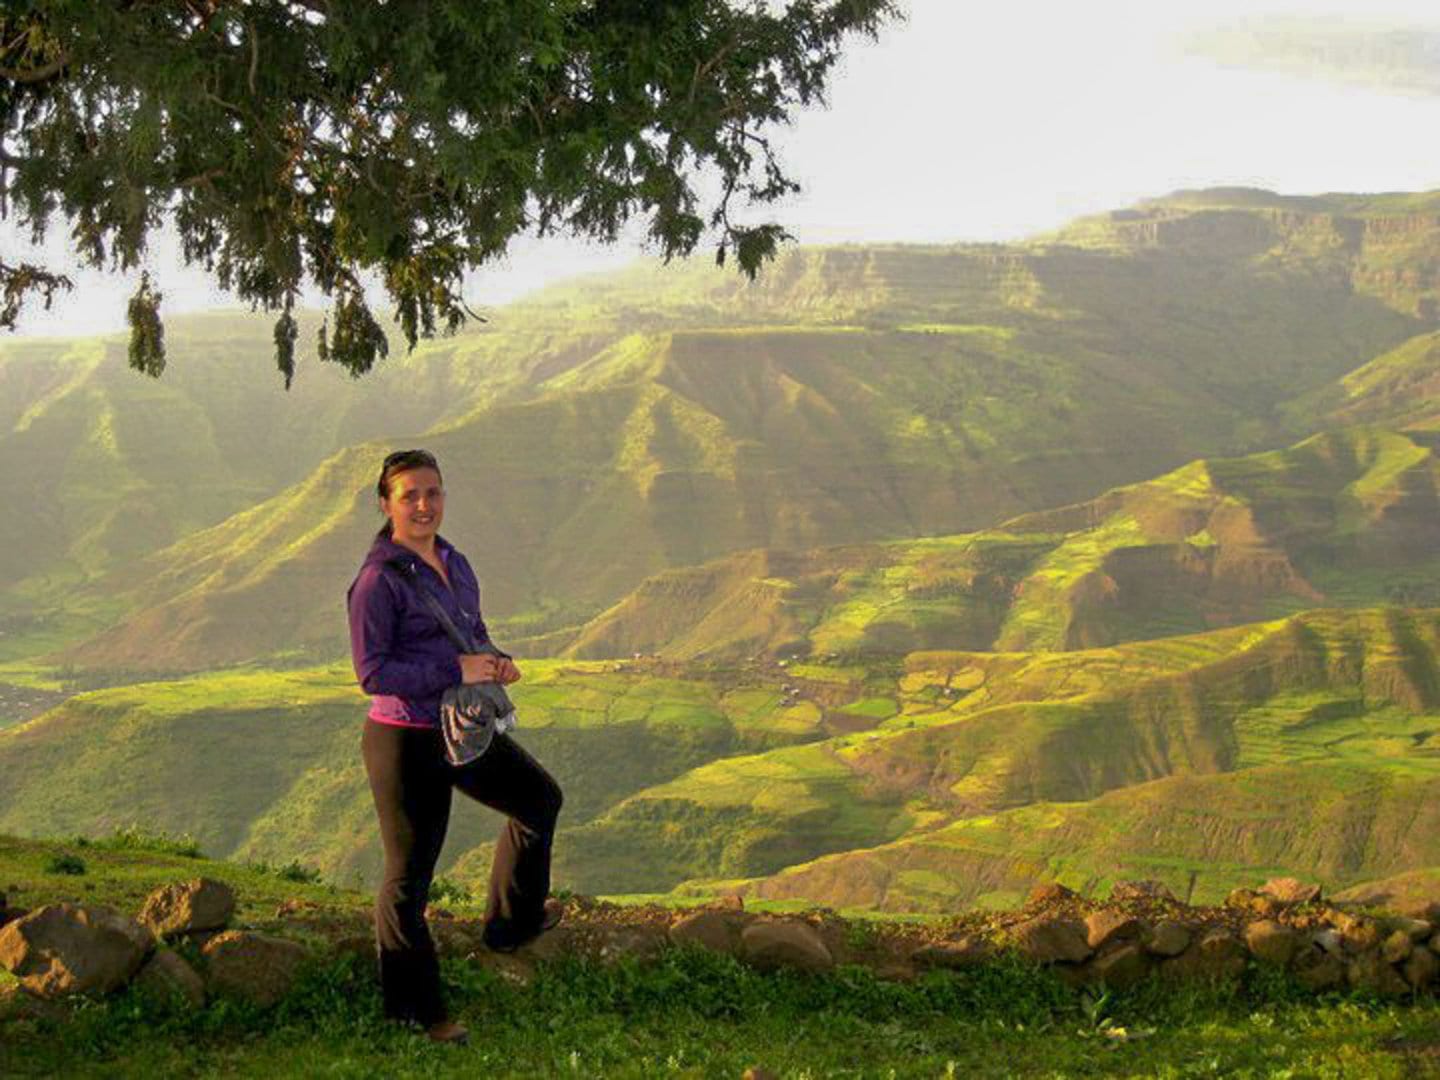 Woman on a mountain in Ethiopia surrounded by lush landscape.